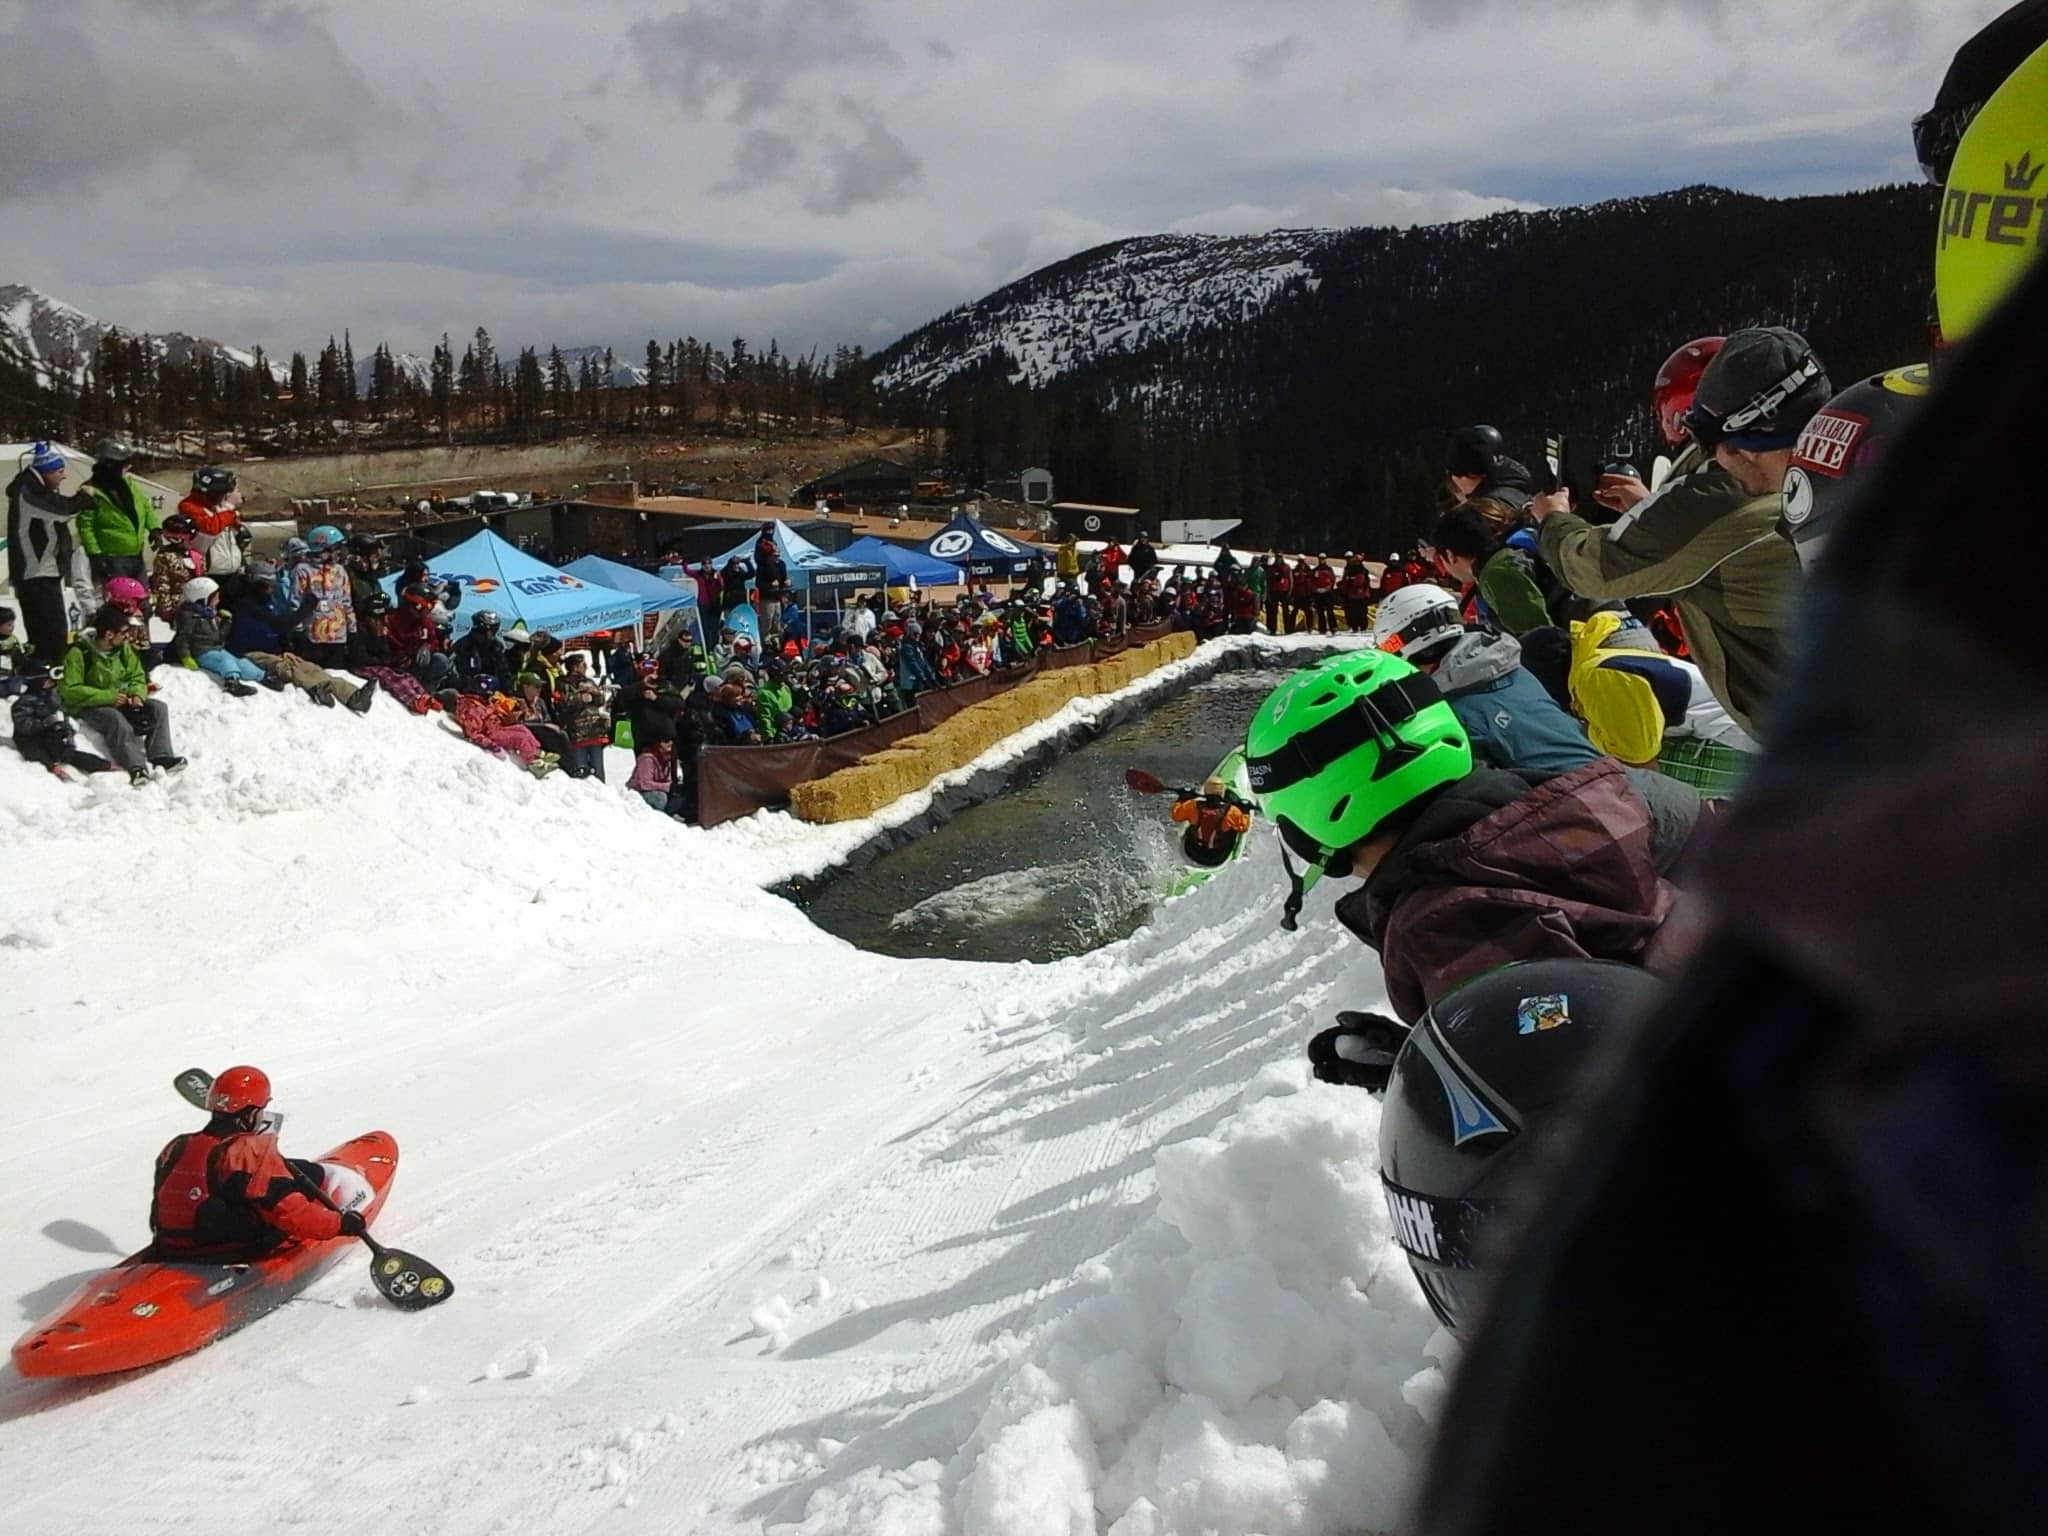 Kayaks on Snow on a ski mountain with people cheering them on.